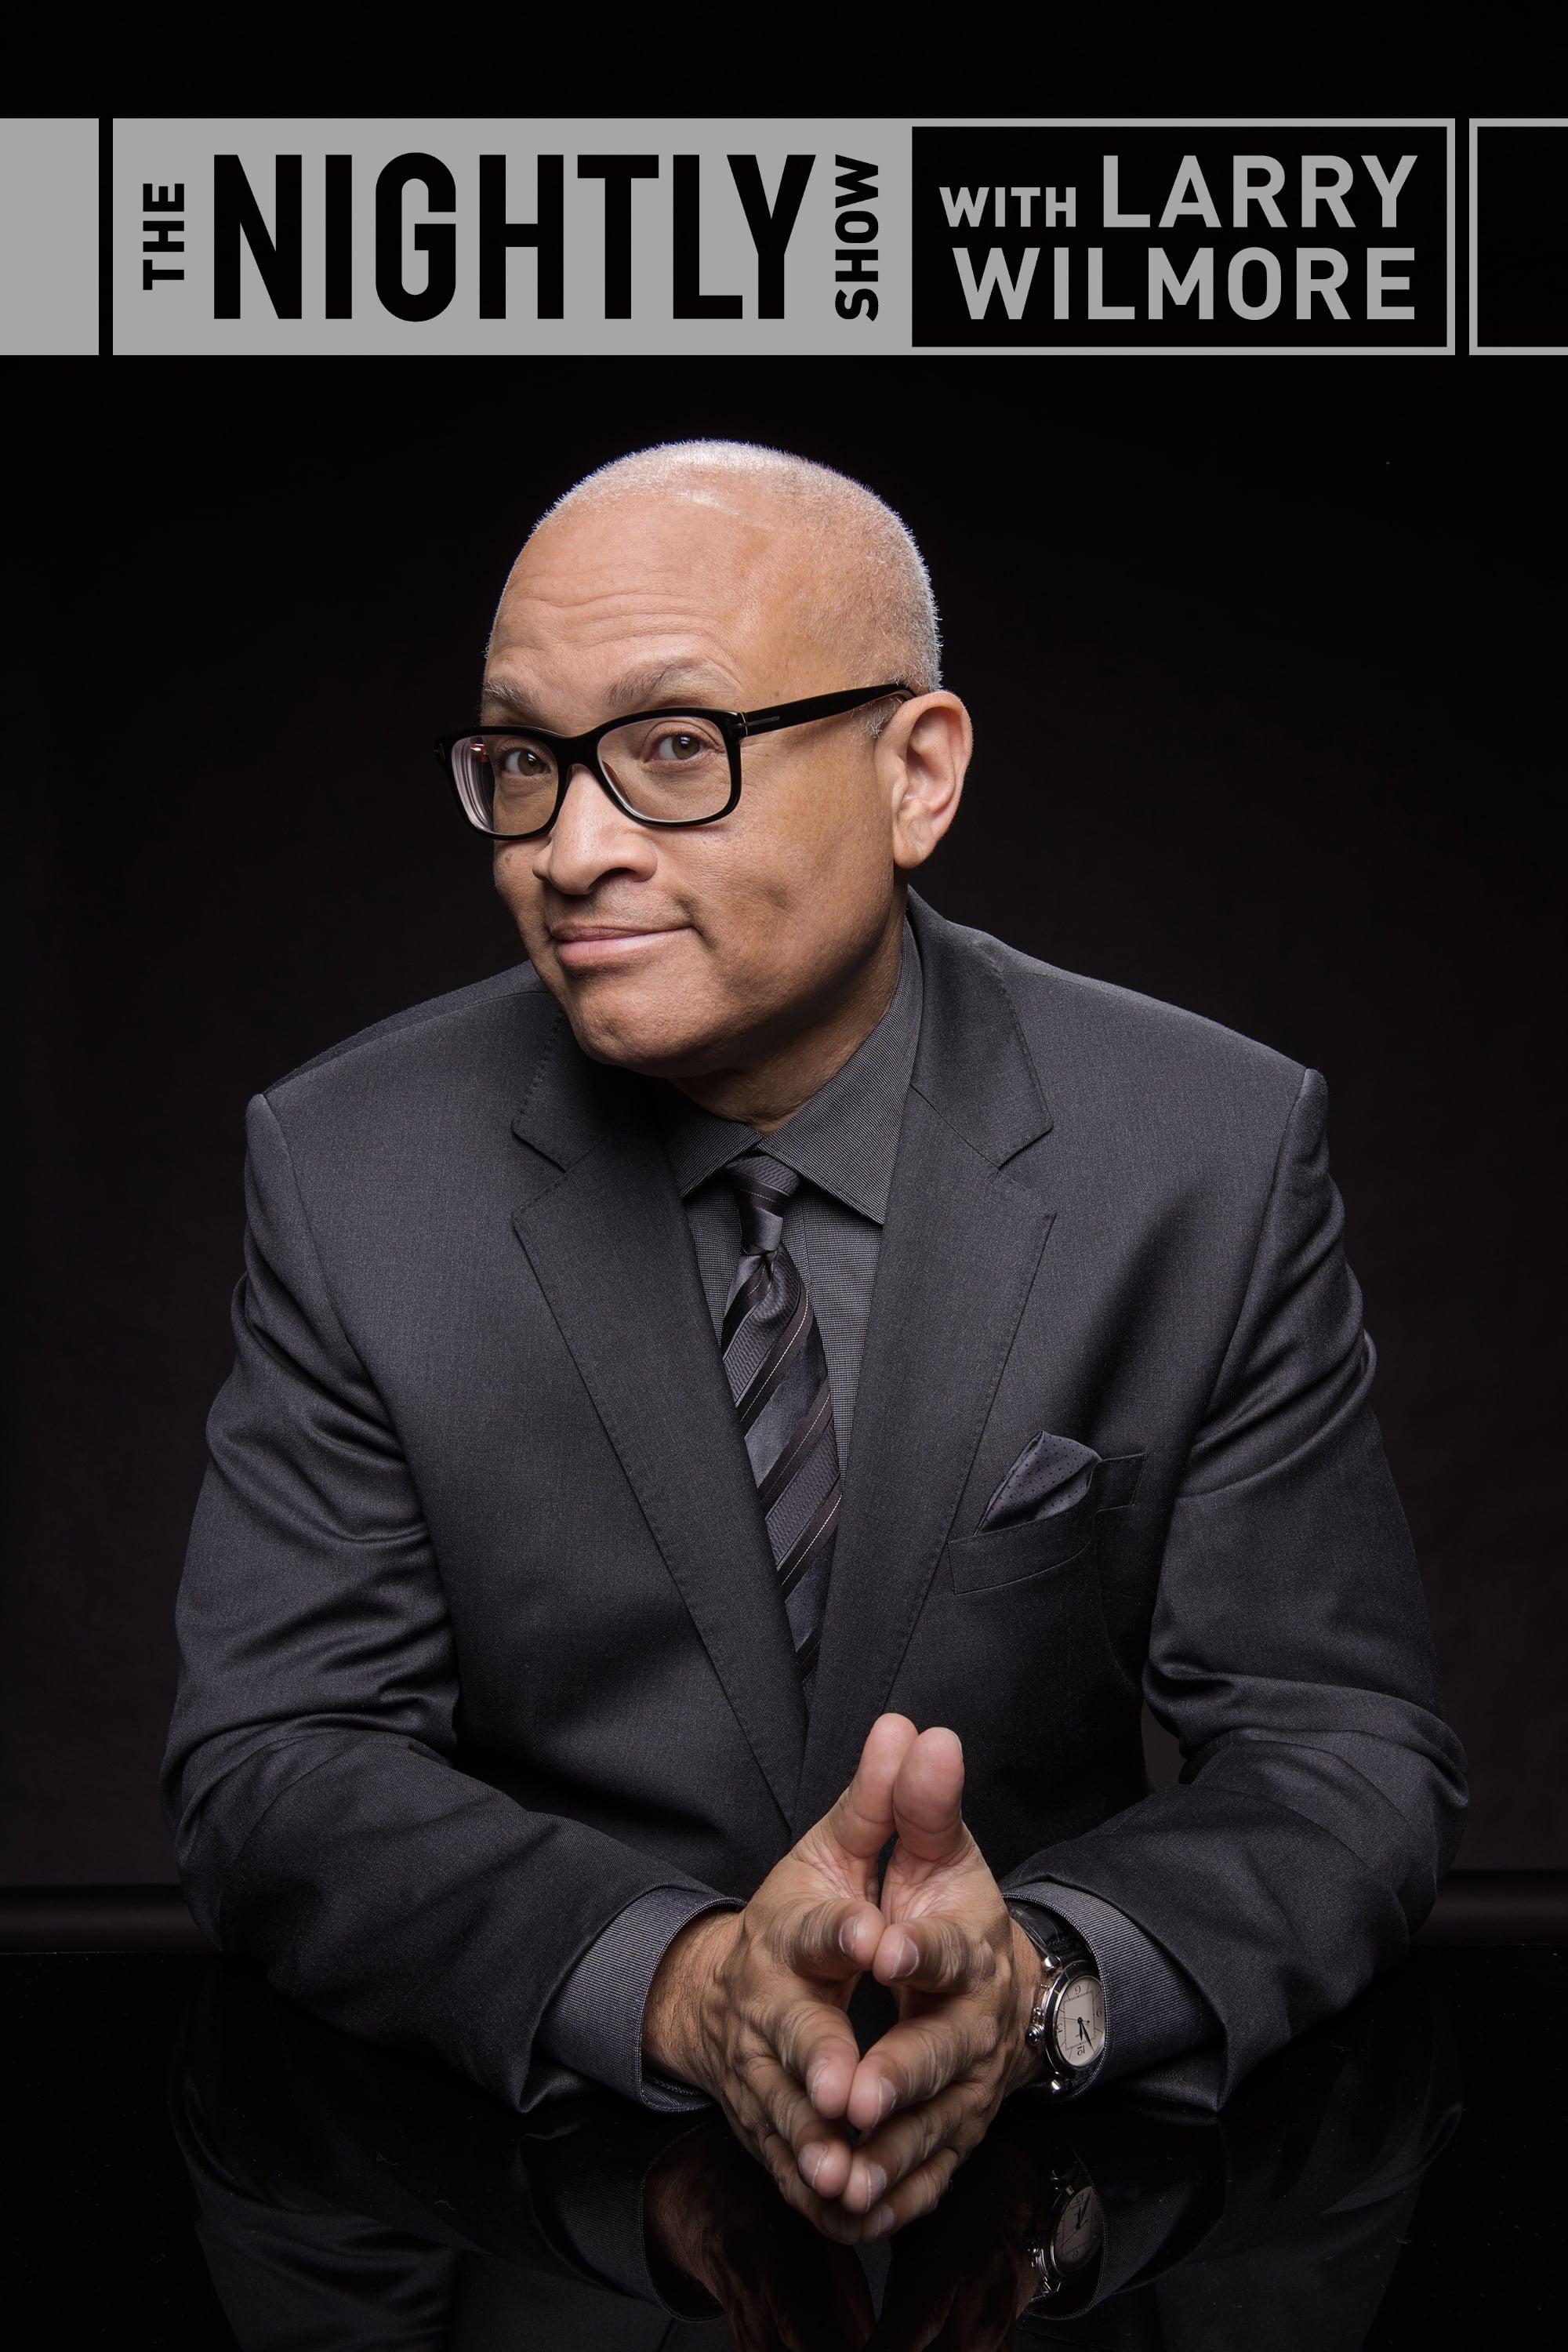 The Nightly Show with Larry Wilmore poster